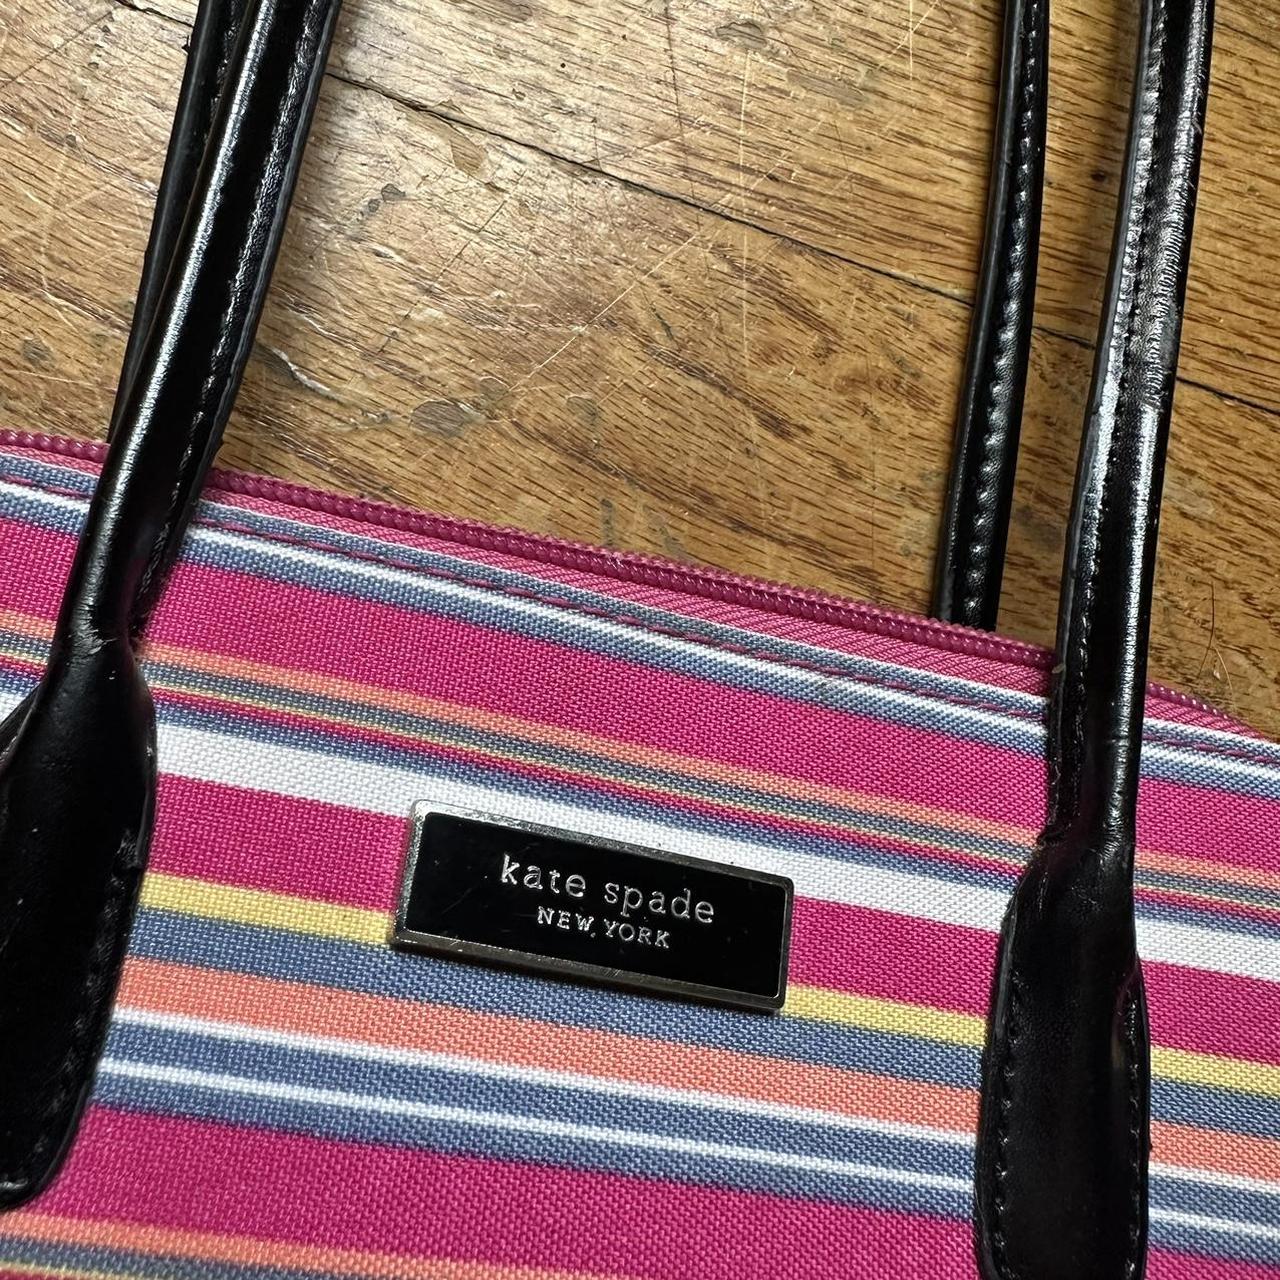 Vintage Kate Spade purse that has pink and white - Depop